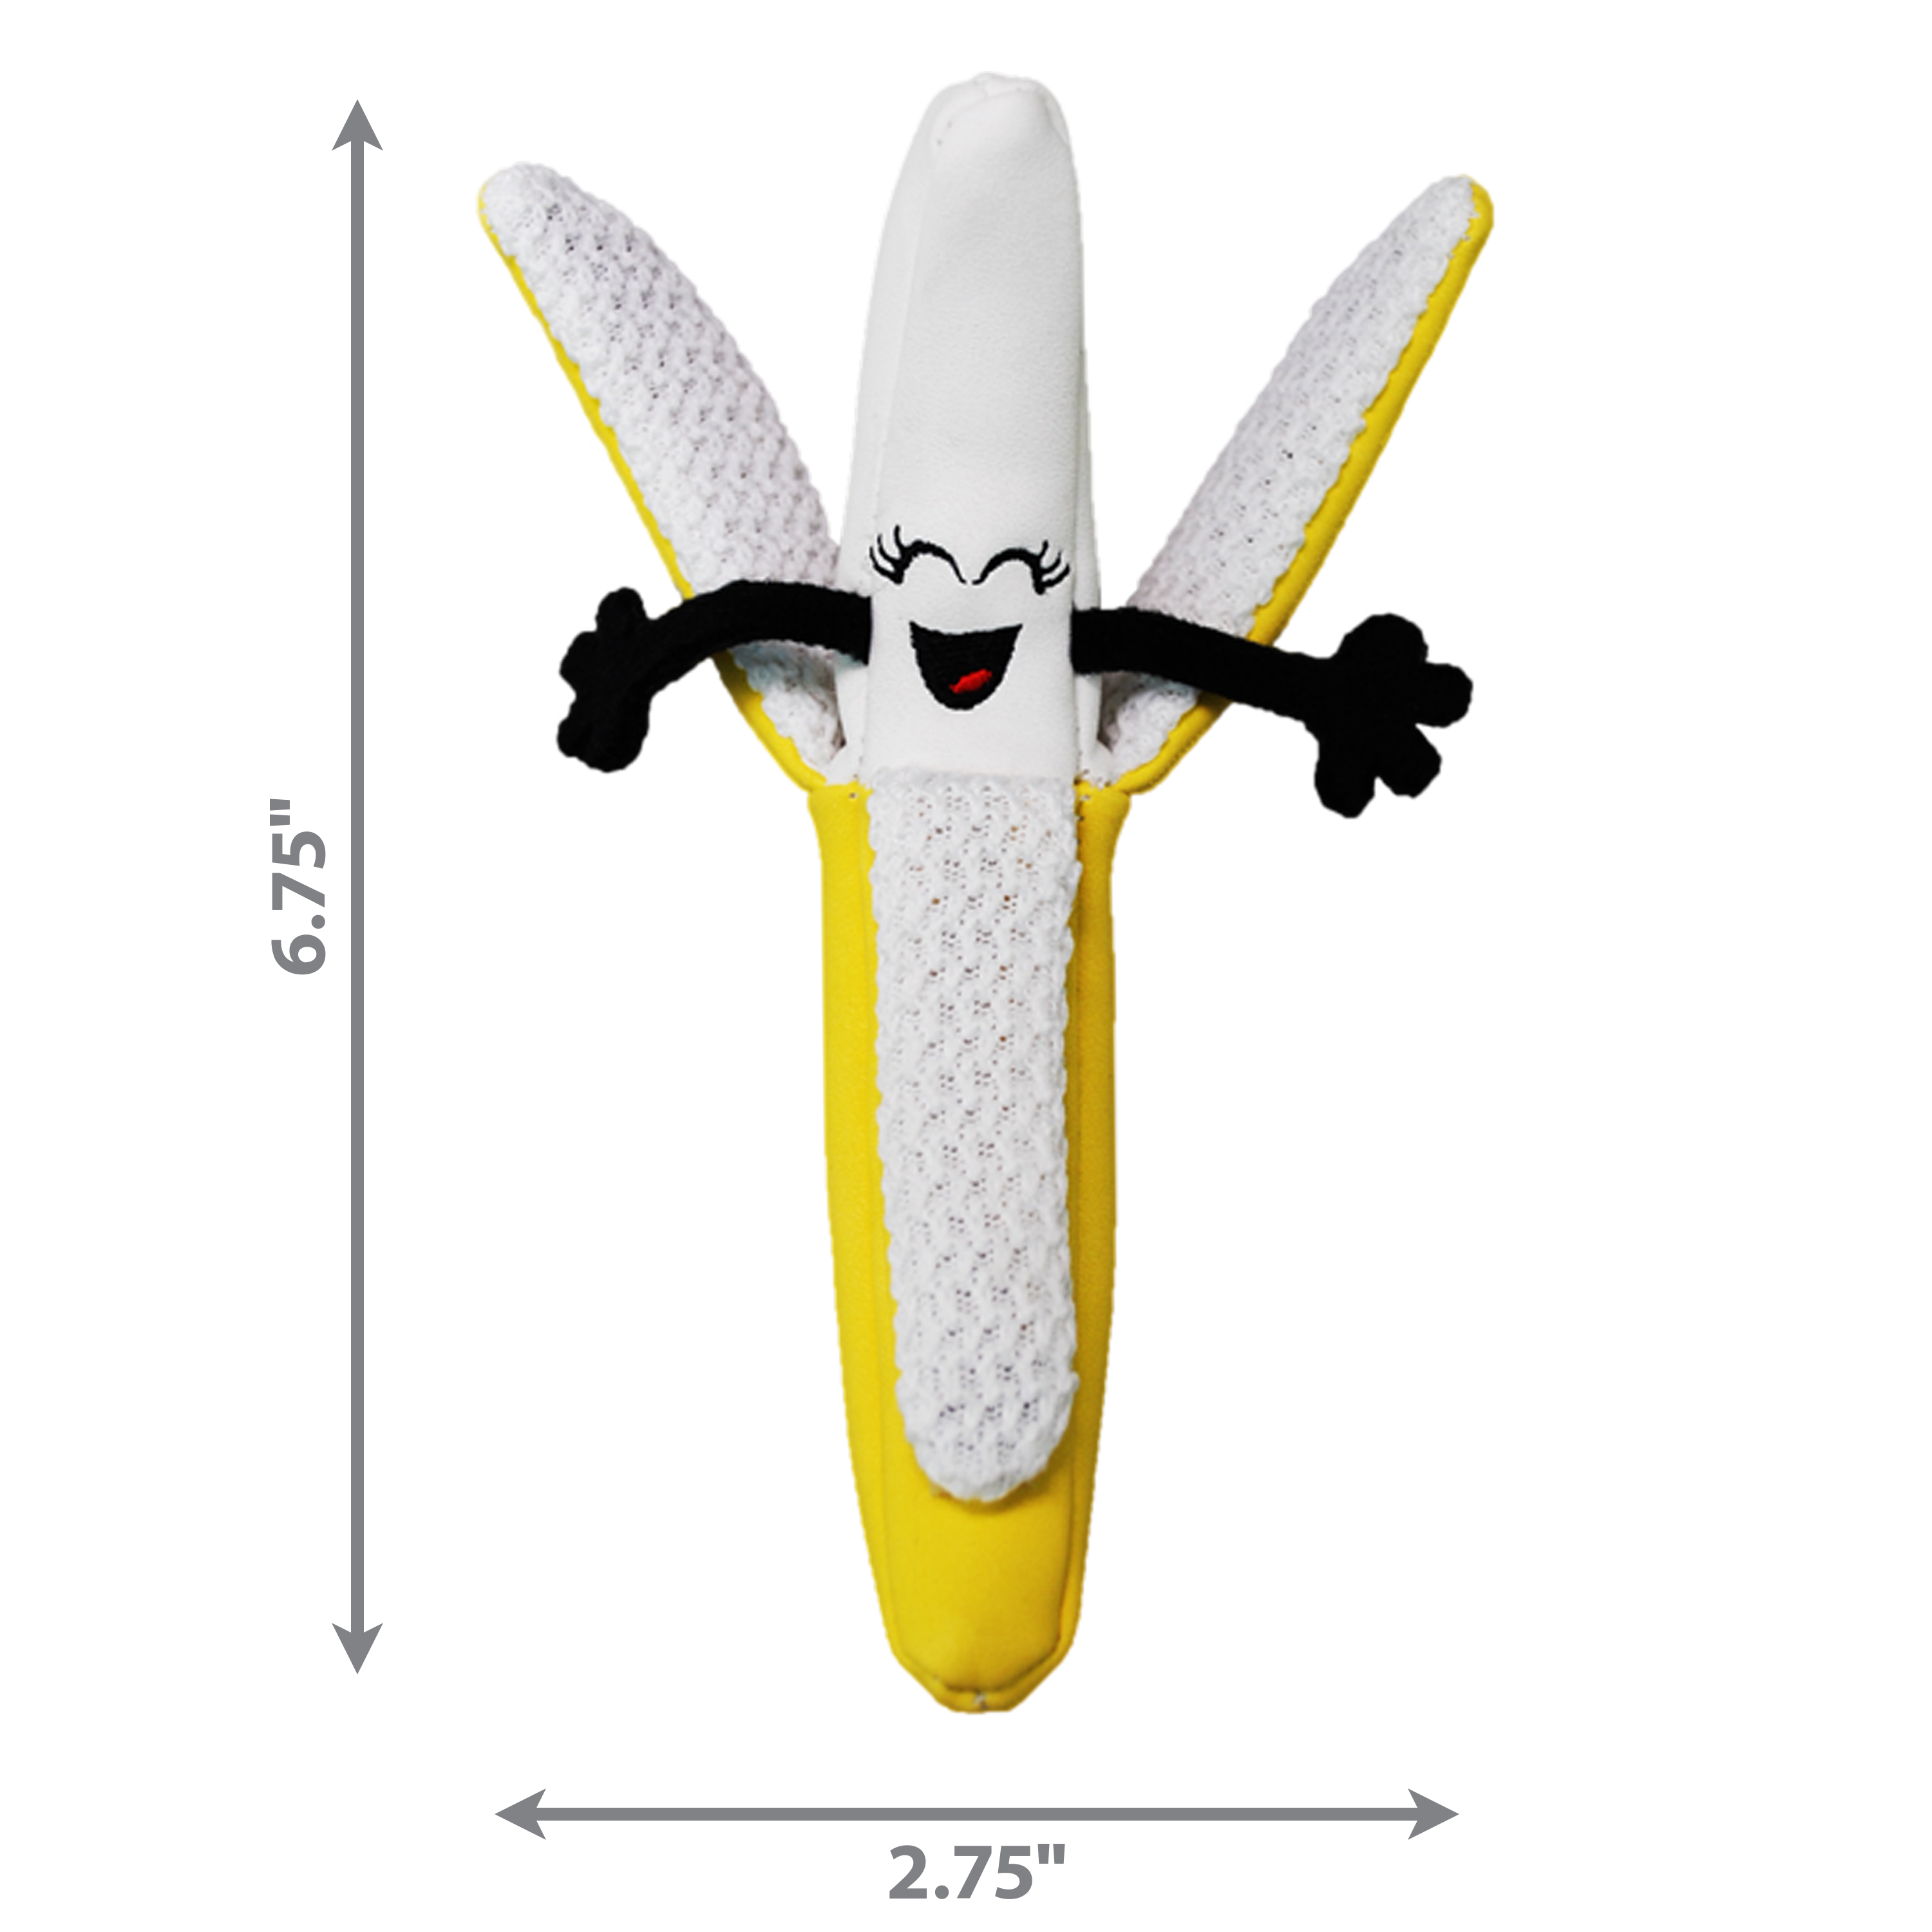 Better Buzz Banana dimoffpack product image